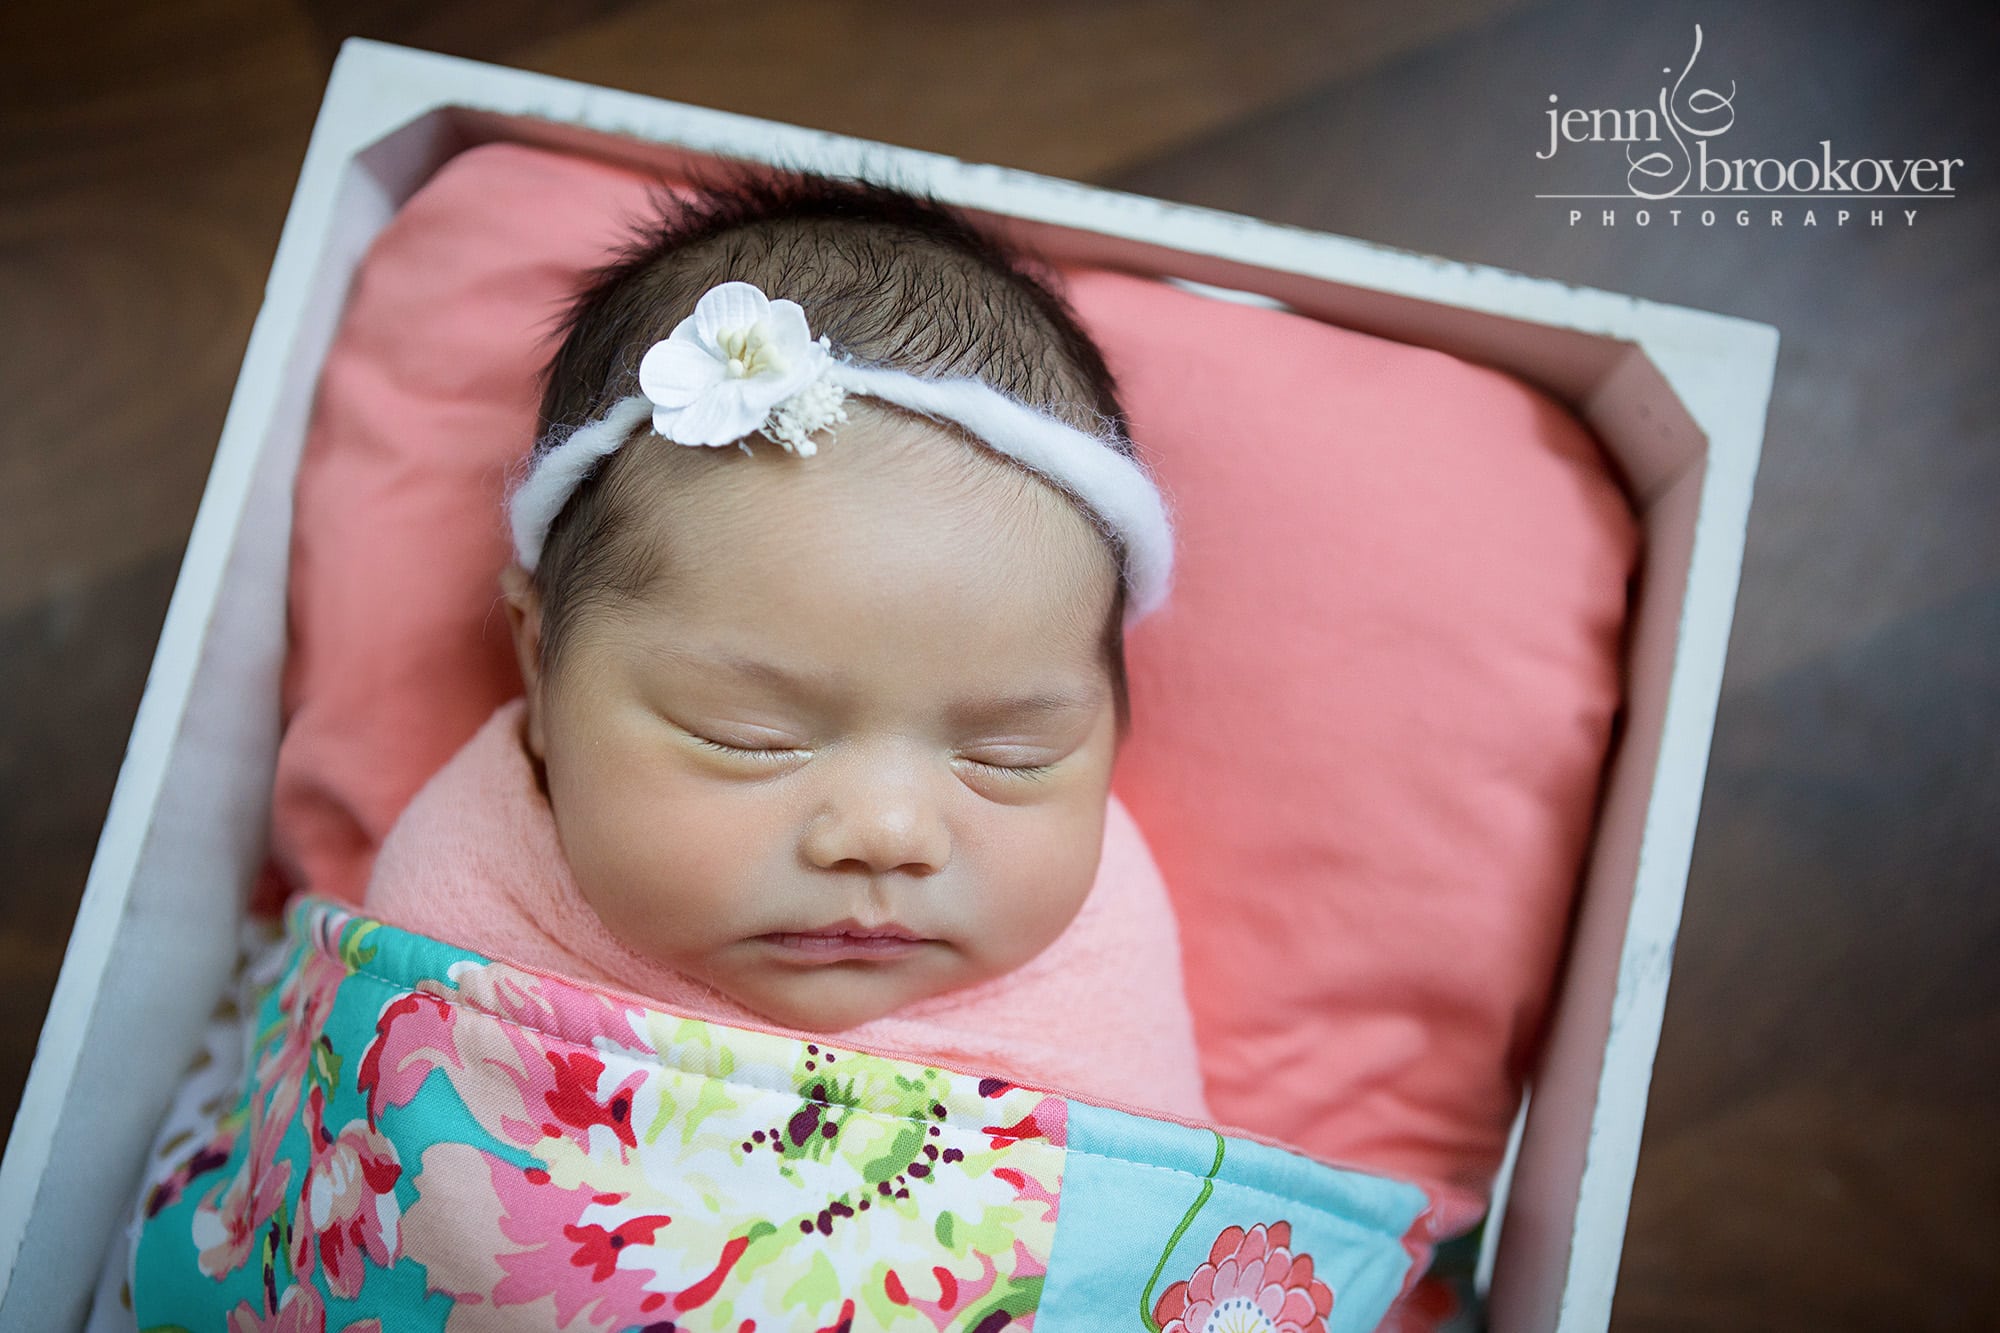 newborn baby girl in a coral, pink and teal quilt and white headband taken by Jenn Brookover in San Antonio